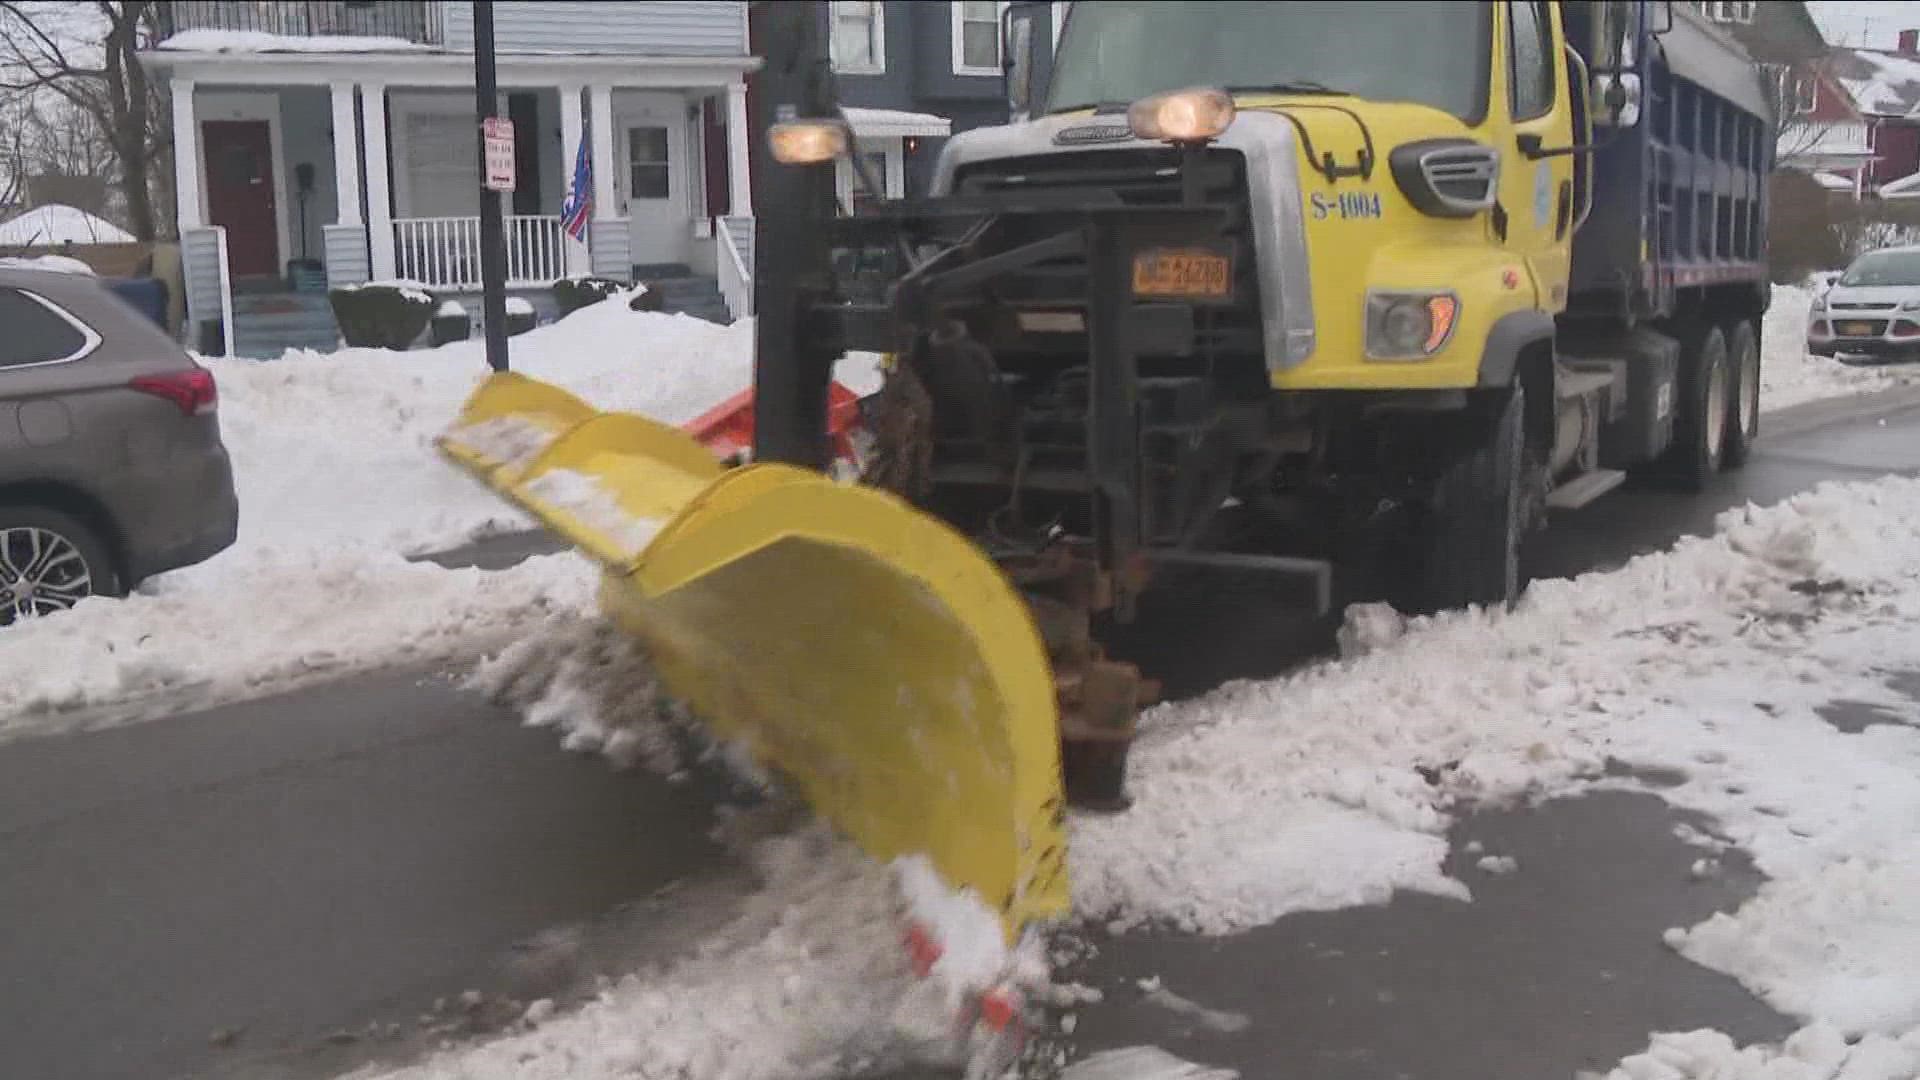 New technology will be used to improve snow plowing throughout city neighborhoods.